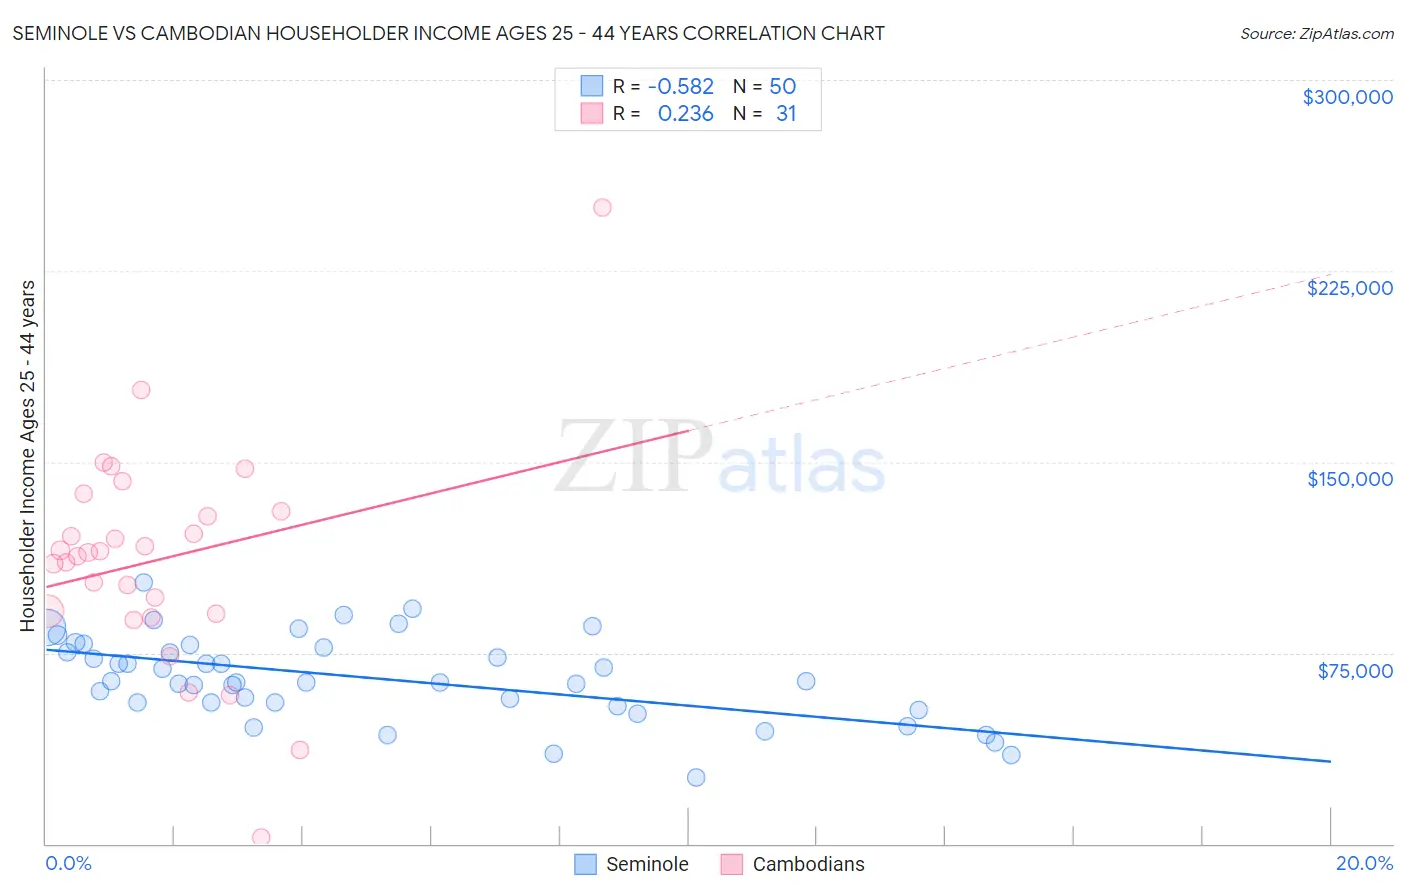 Seminole vs Cambodian Householder Income Ages 25 - 44 years